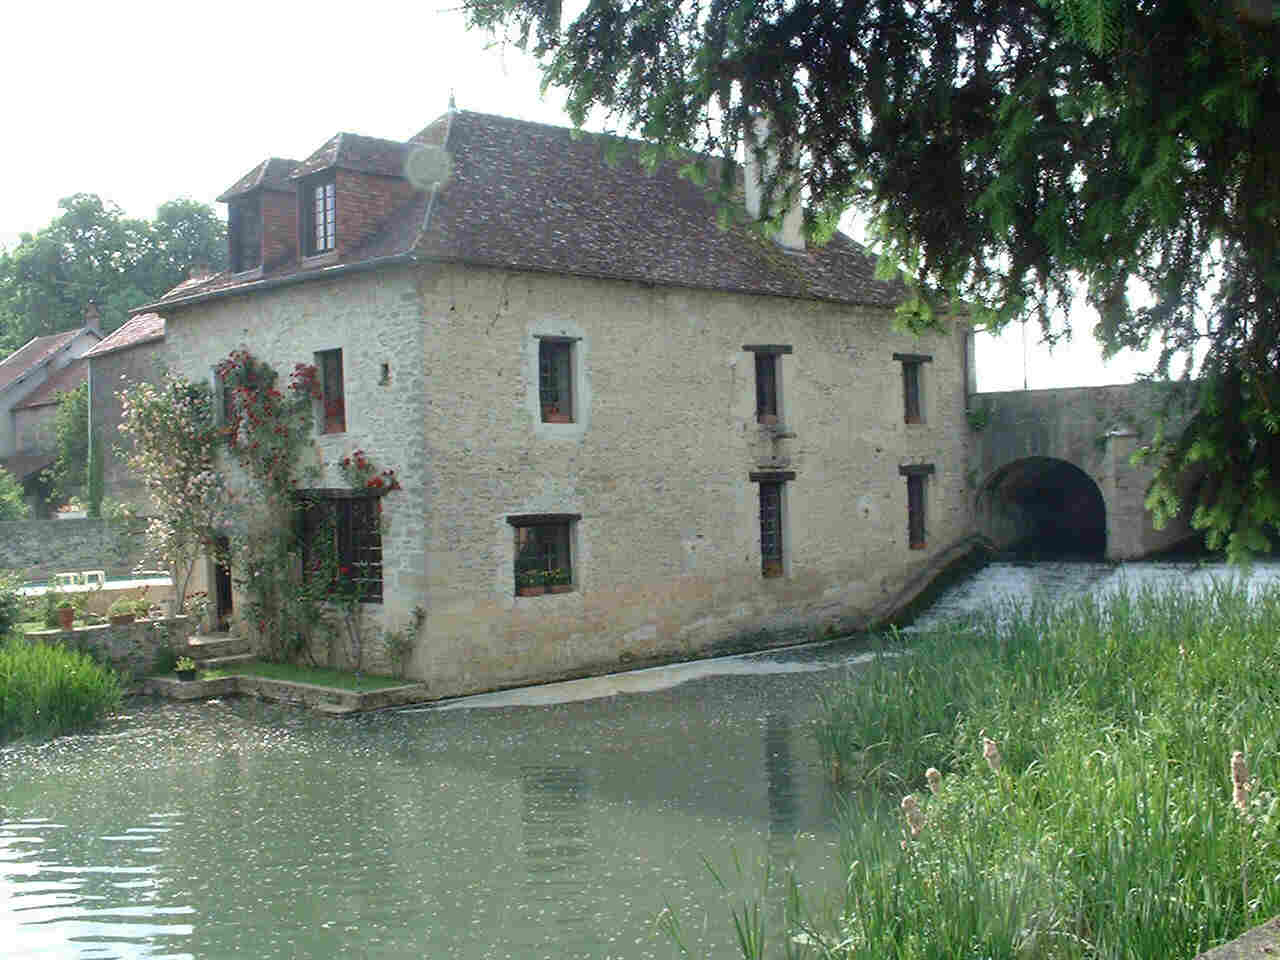 Le Vieux Moulin showing the waterfall